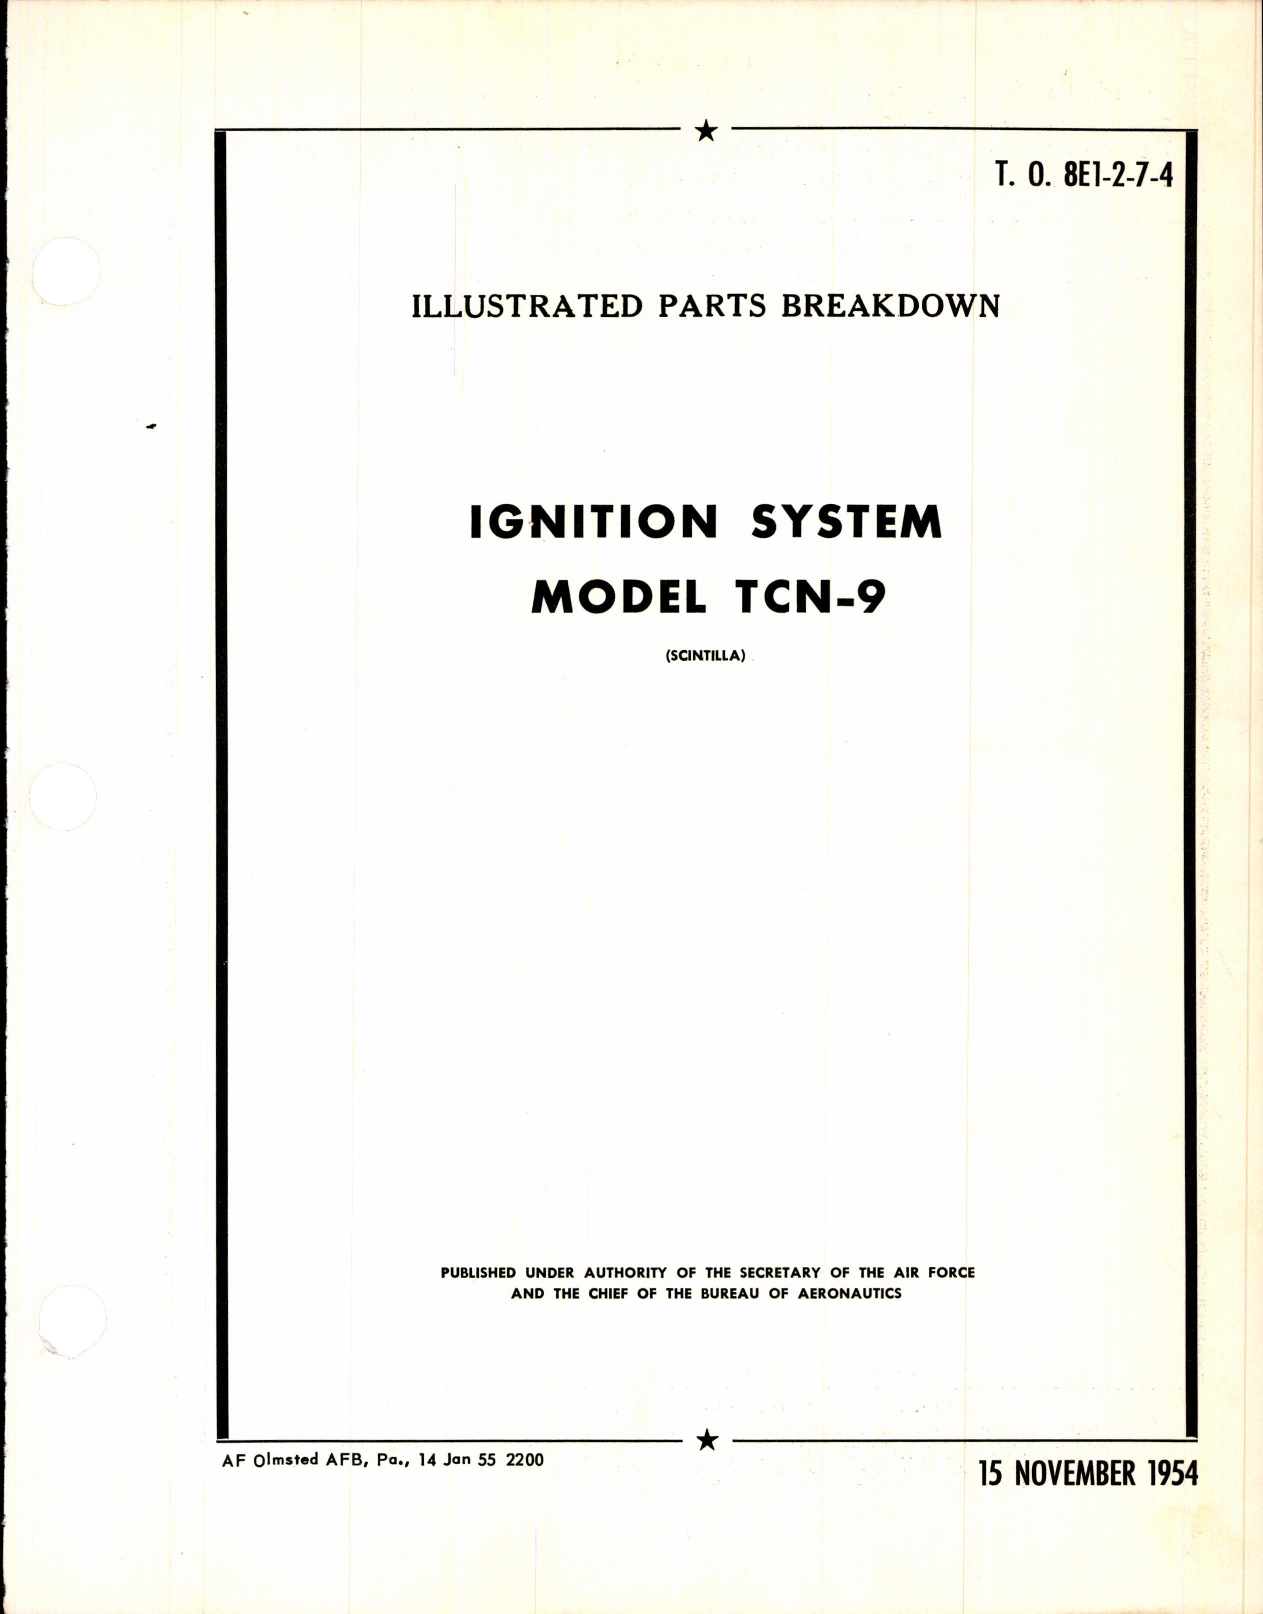 Sample page 1 from AirCorps Library document: Illustrated Parts Breakdown for Ignition System Model TCN-9